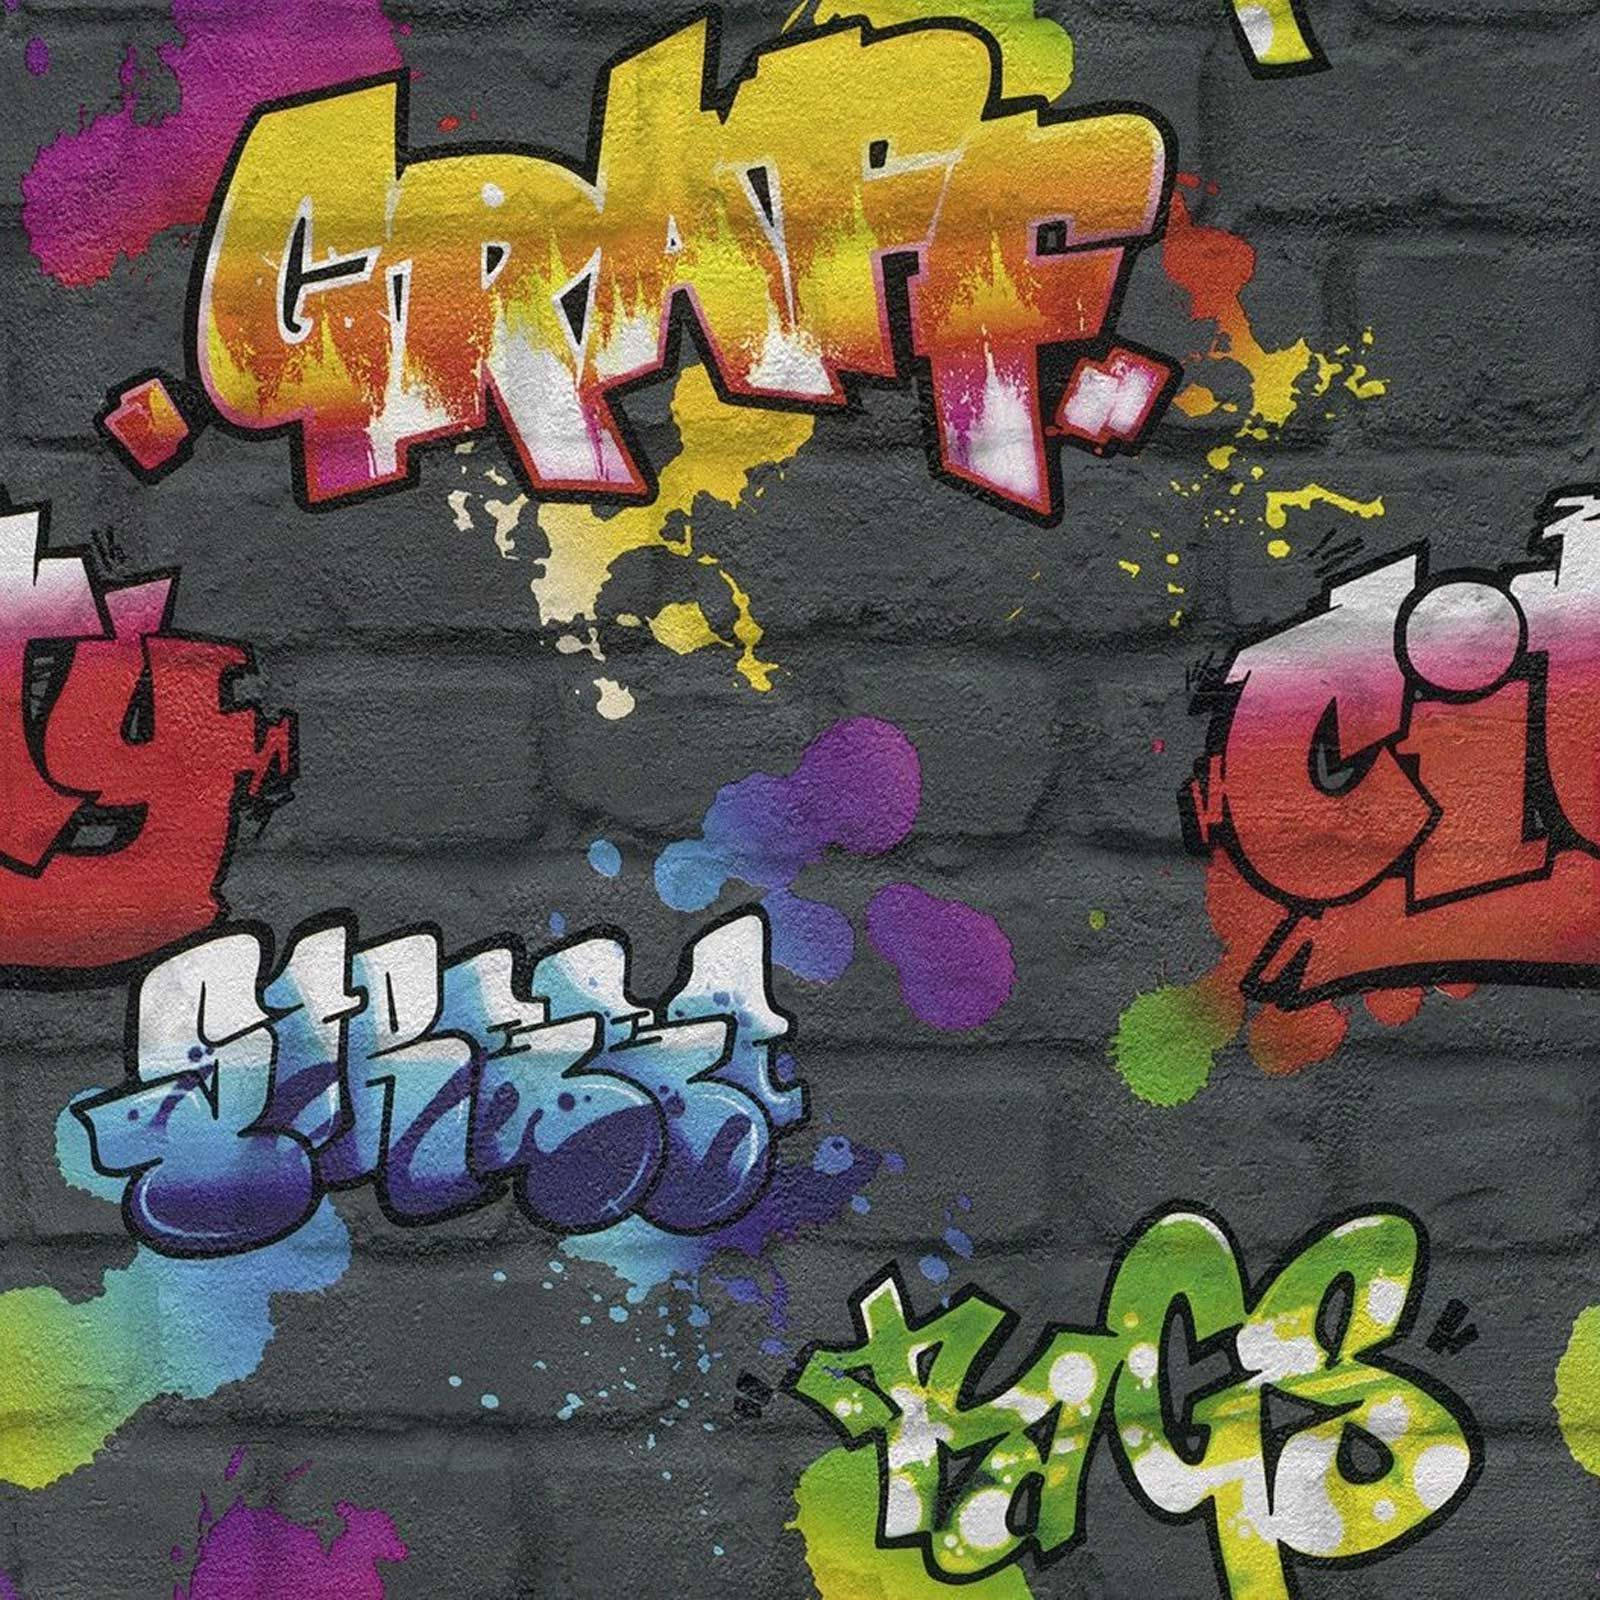 Wallpaper of different words graffiti painting on wall.